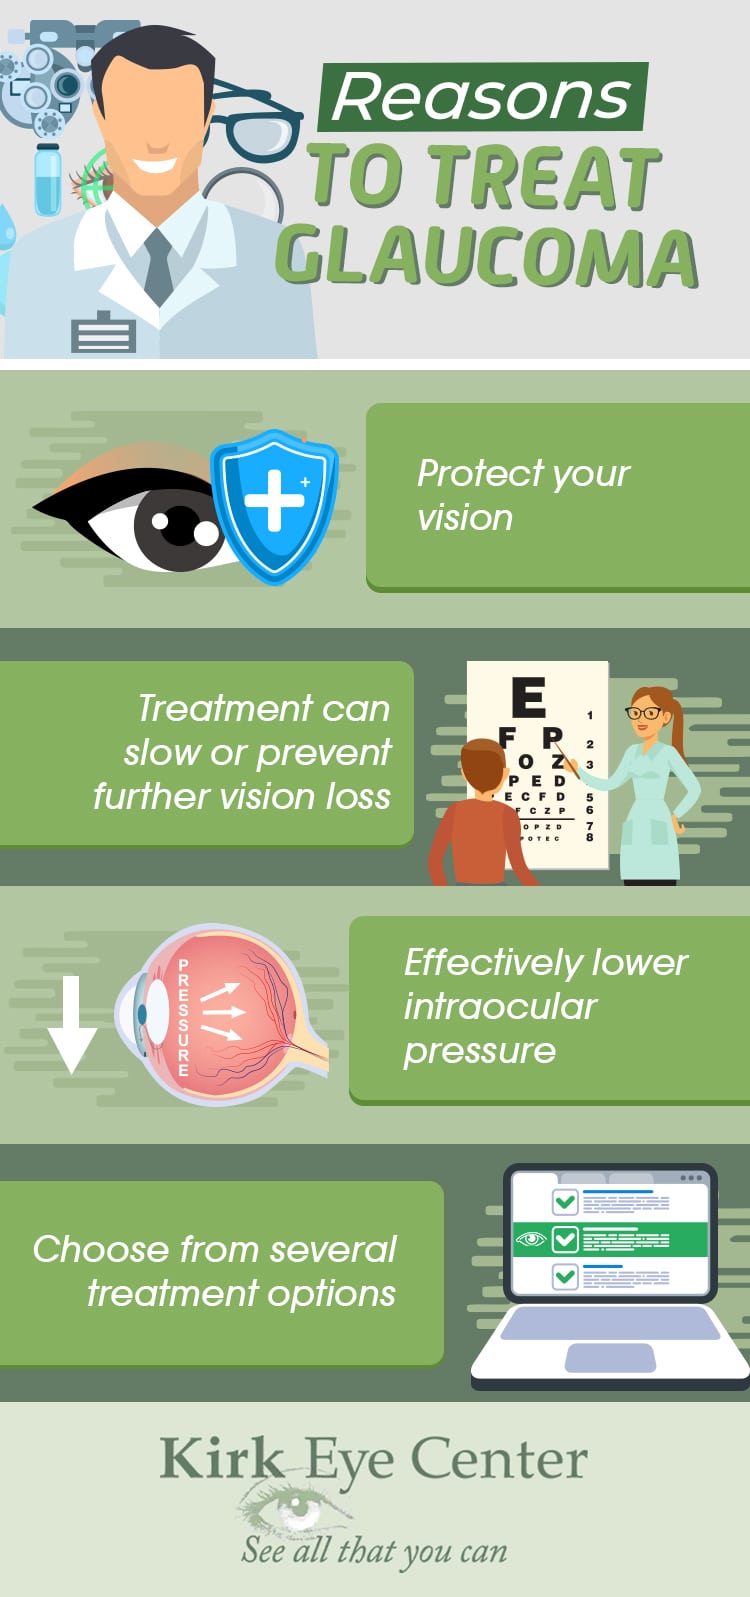 Infographic discussing the reasons to treat glaucoma